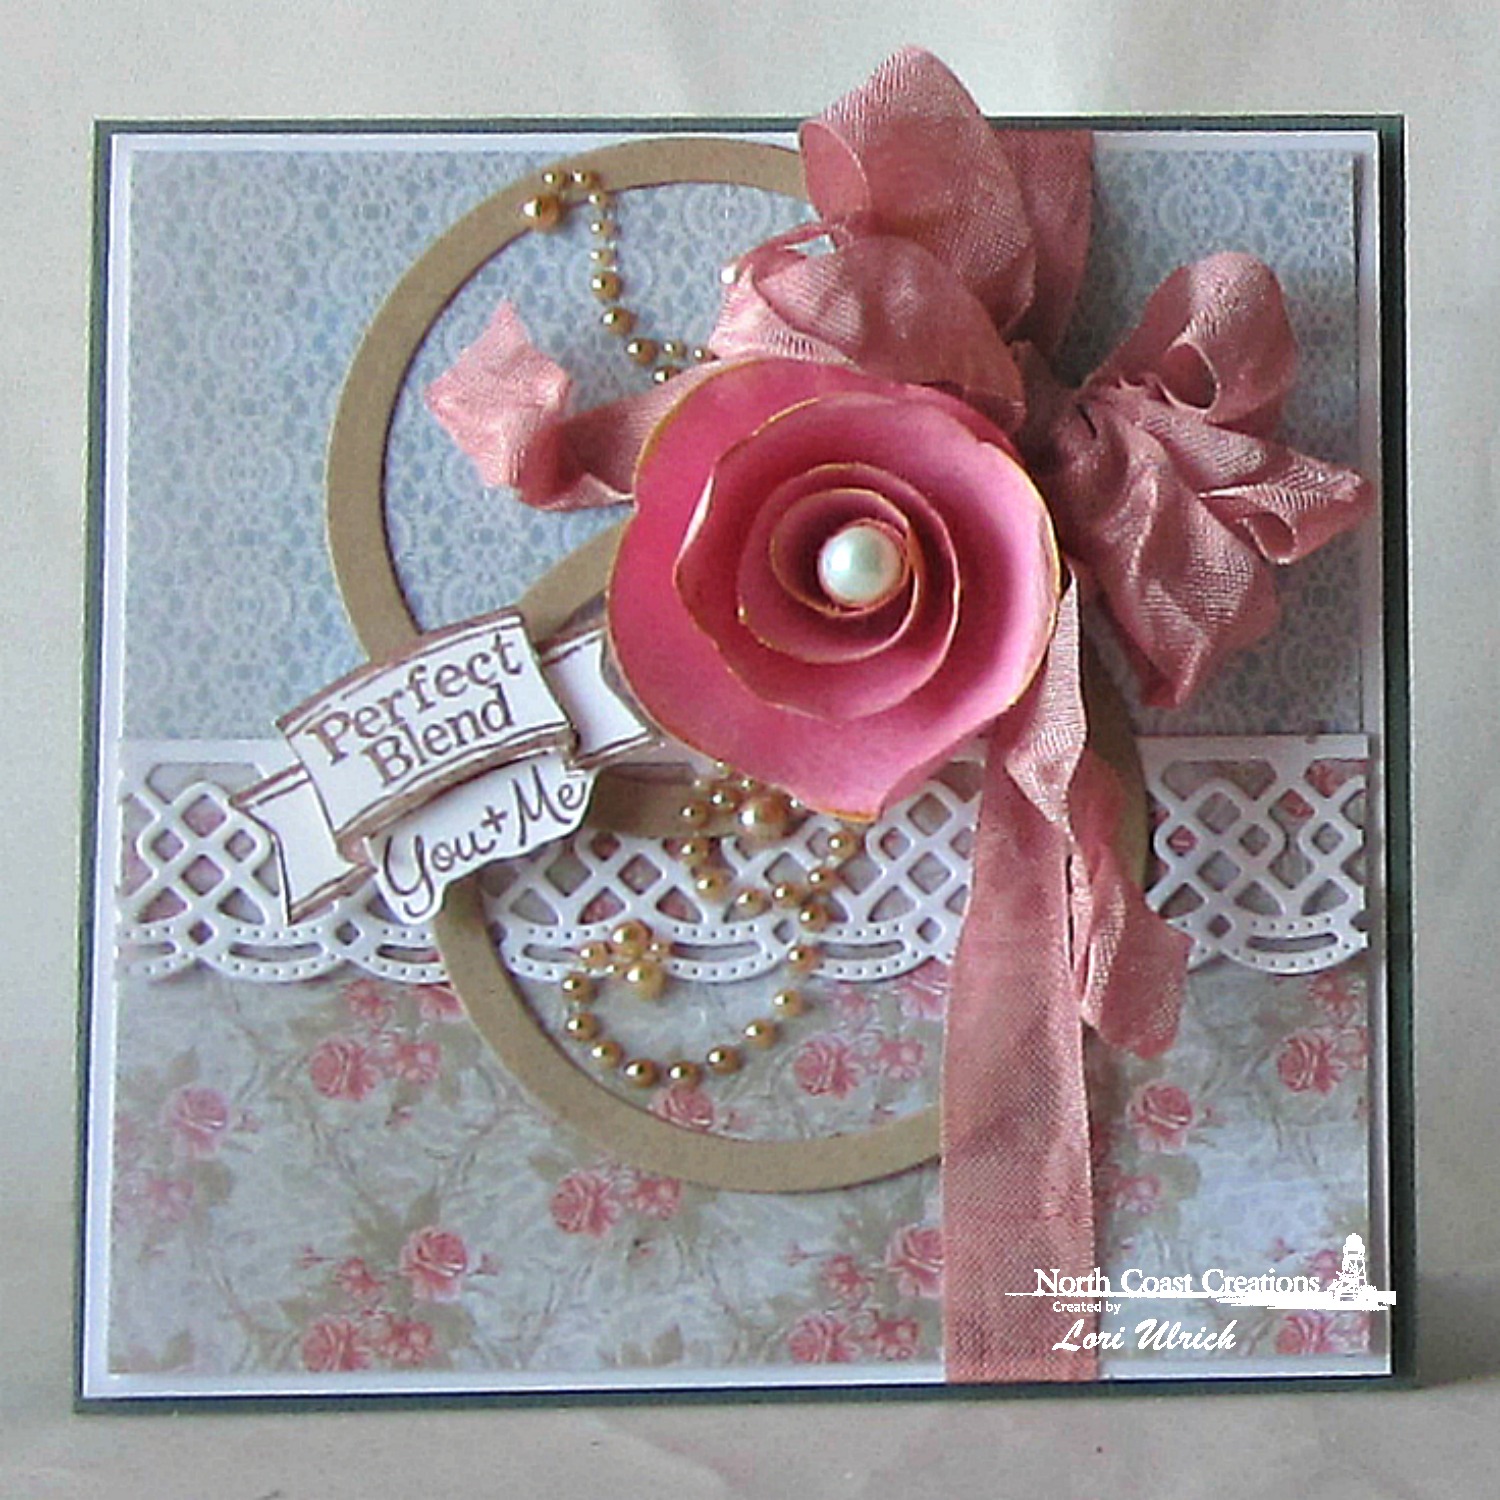 Stamps - North Coast Creations What's Brewin'?, Our Daily Bread Designs Shabby Rose Paper Collection, ODBD Custom Matting Circles Die, ODBD Custom Beautiful Borders Dies